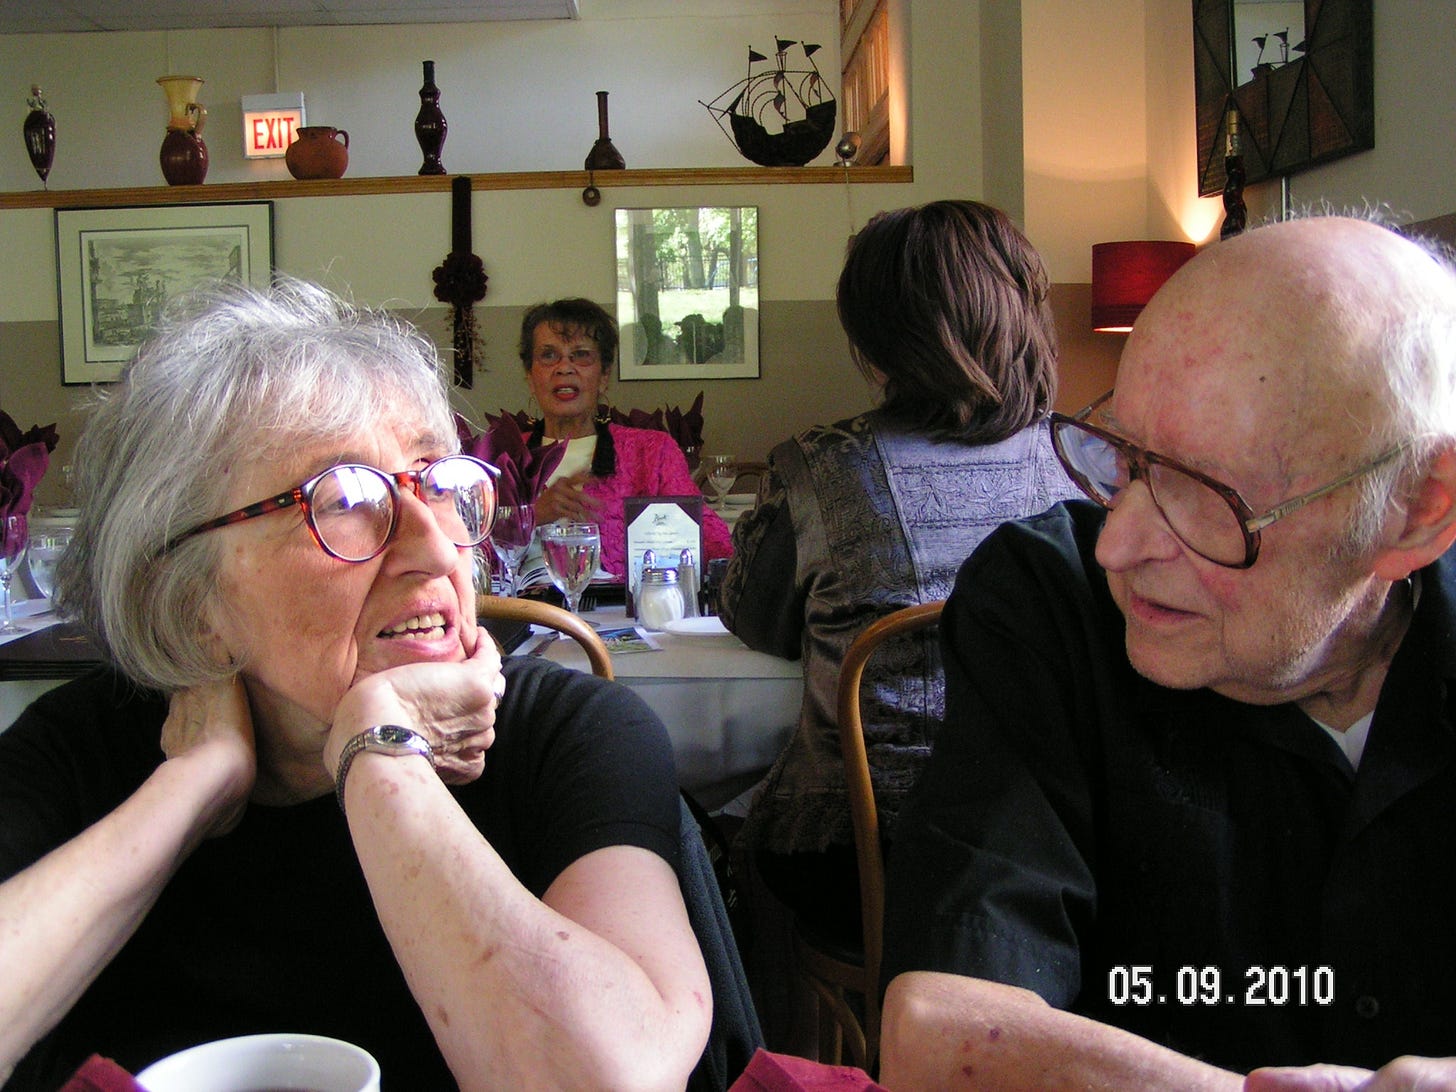 An elderly woman (my mom, Bunny Selden) and man (my late stepfather, Frank Rosen) chatting at a table in a restaurant. In the bottom right-hand corner, there is an imprinted date showing the photo is from May 9, 2010.